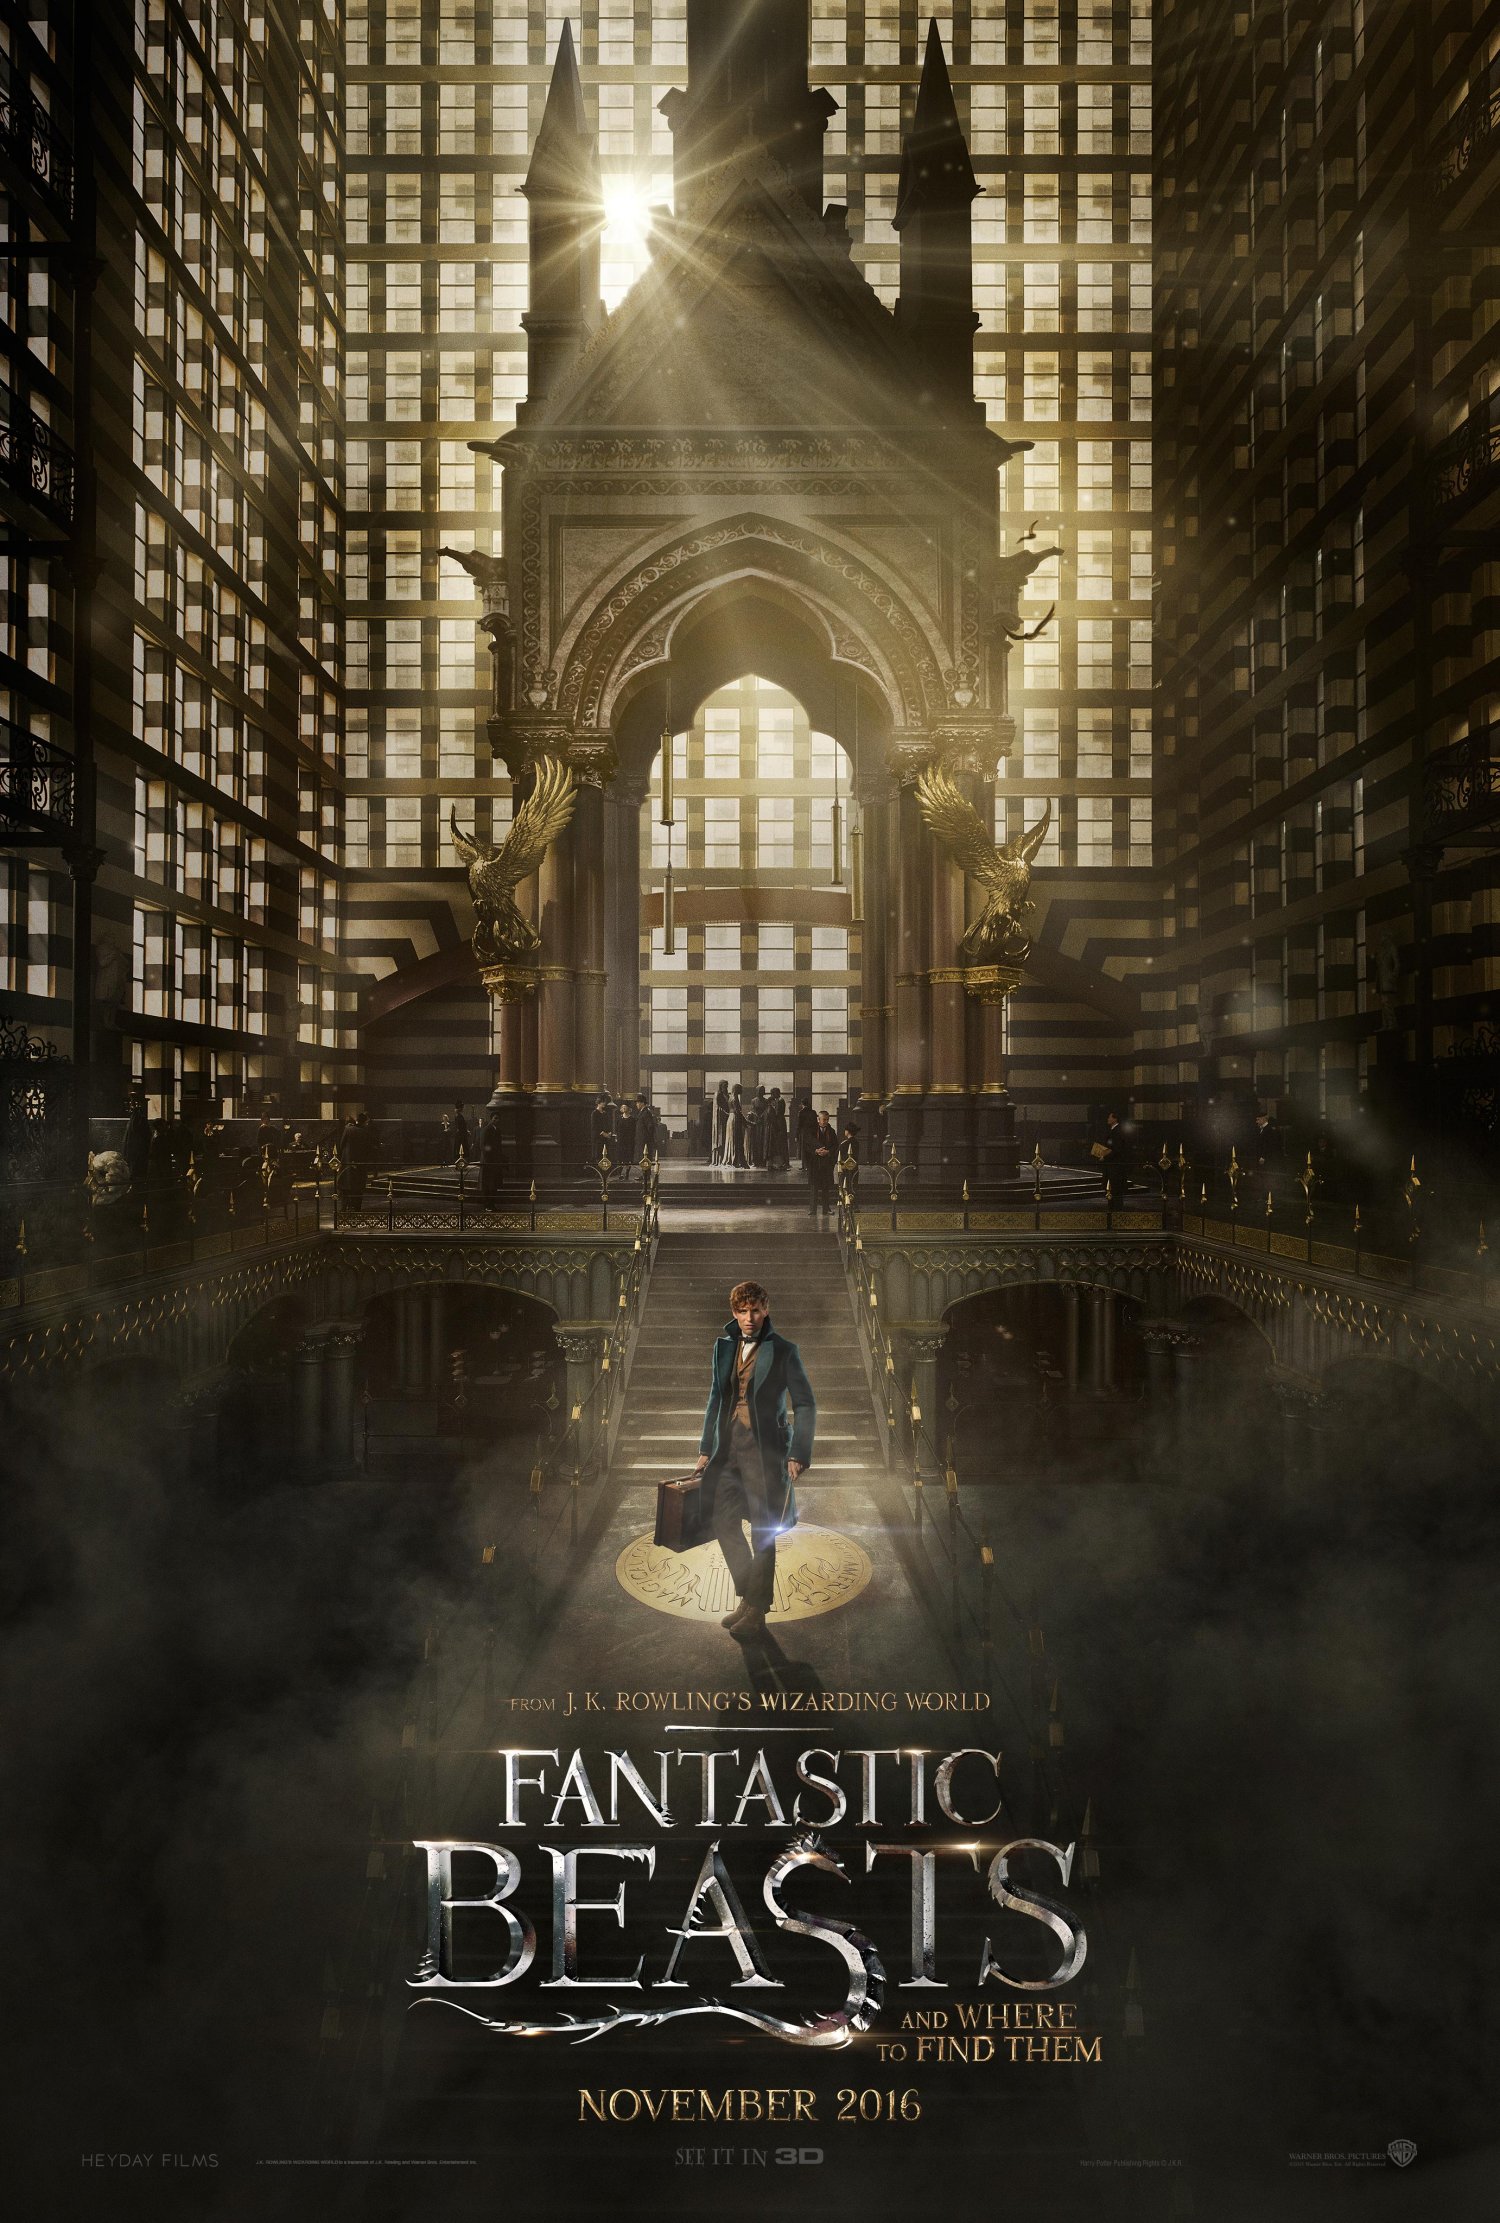 Watch Movie Fantastic Beasts And Where To Find Them Online Full HD